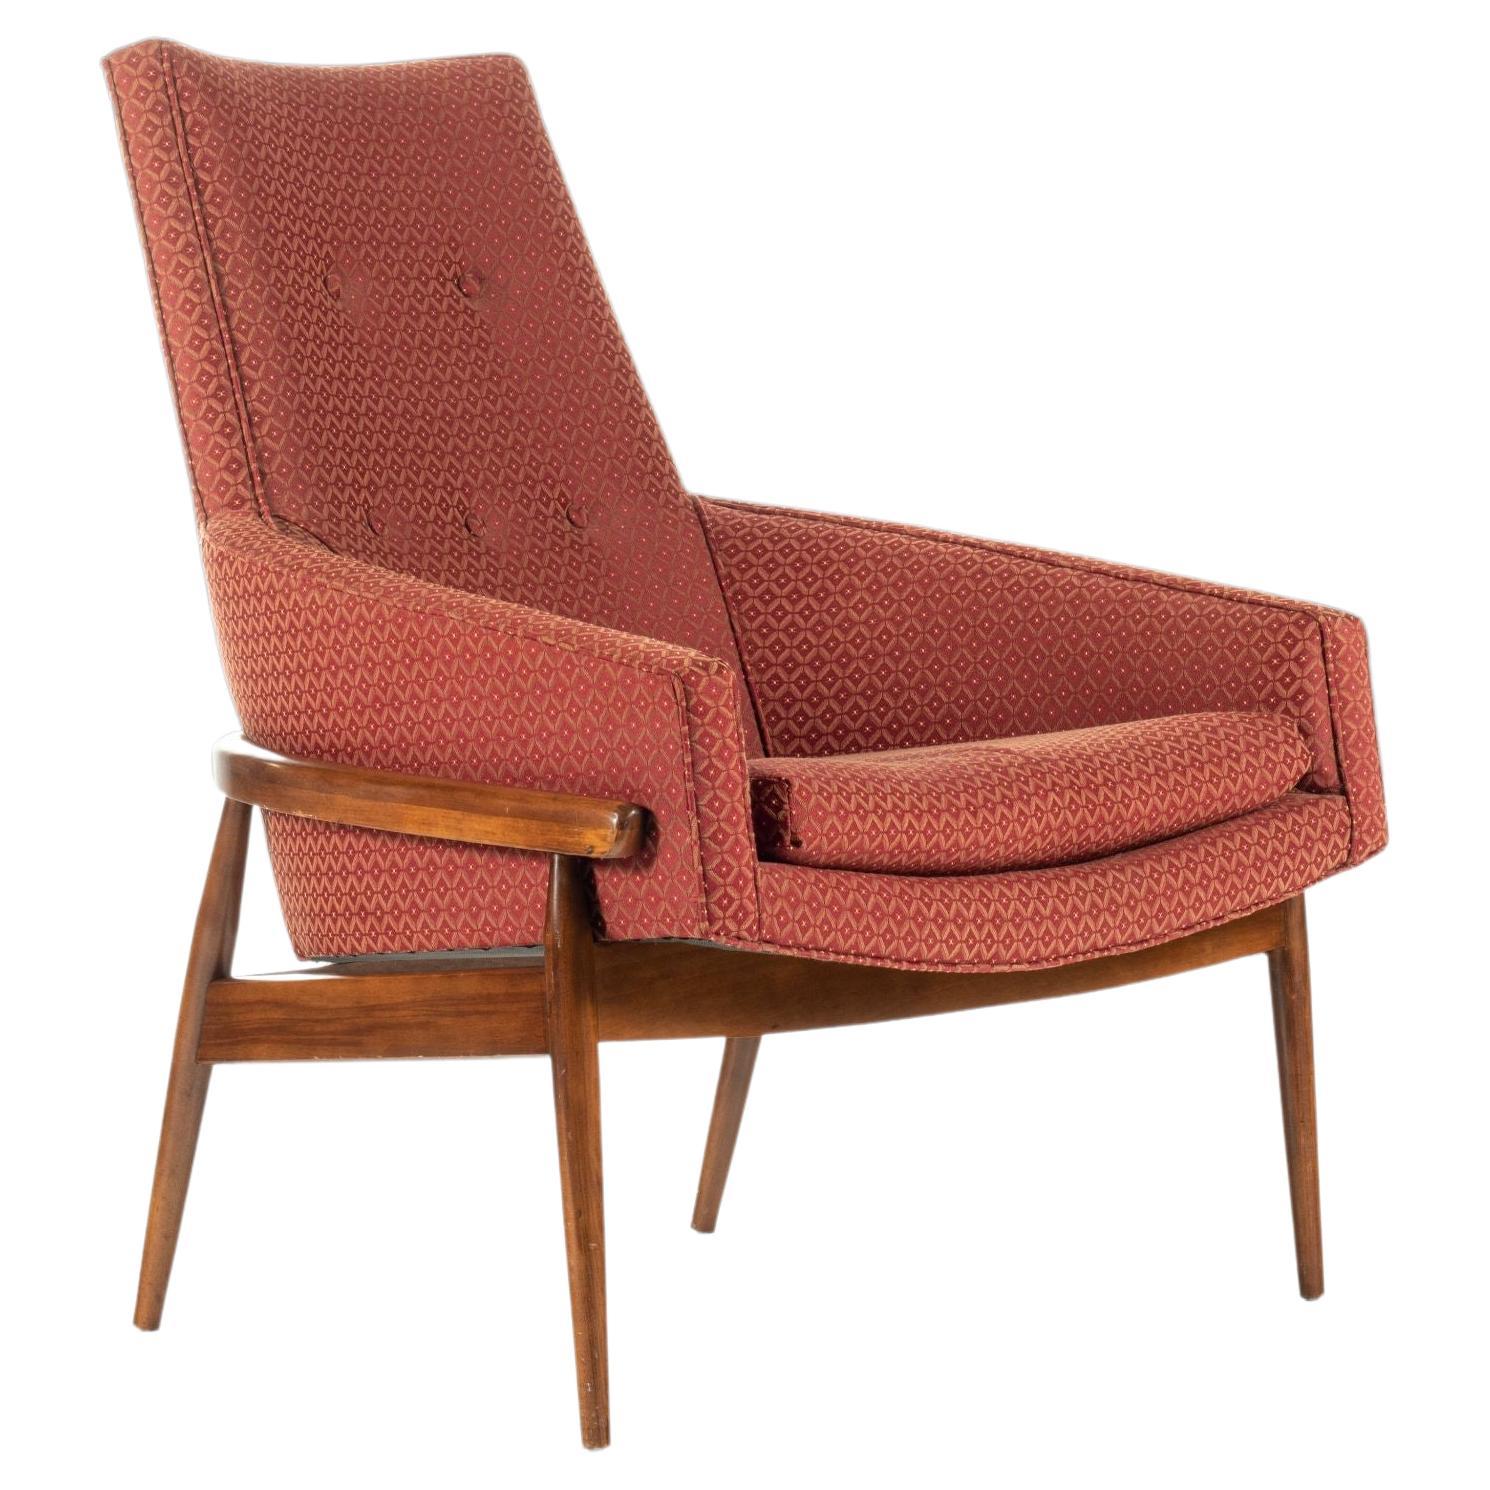 Mid-Century Modern Ruby Red High Back Barrel Chair Fairfield Chair Co., c. 1960s For Sale